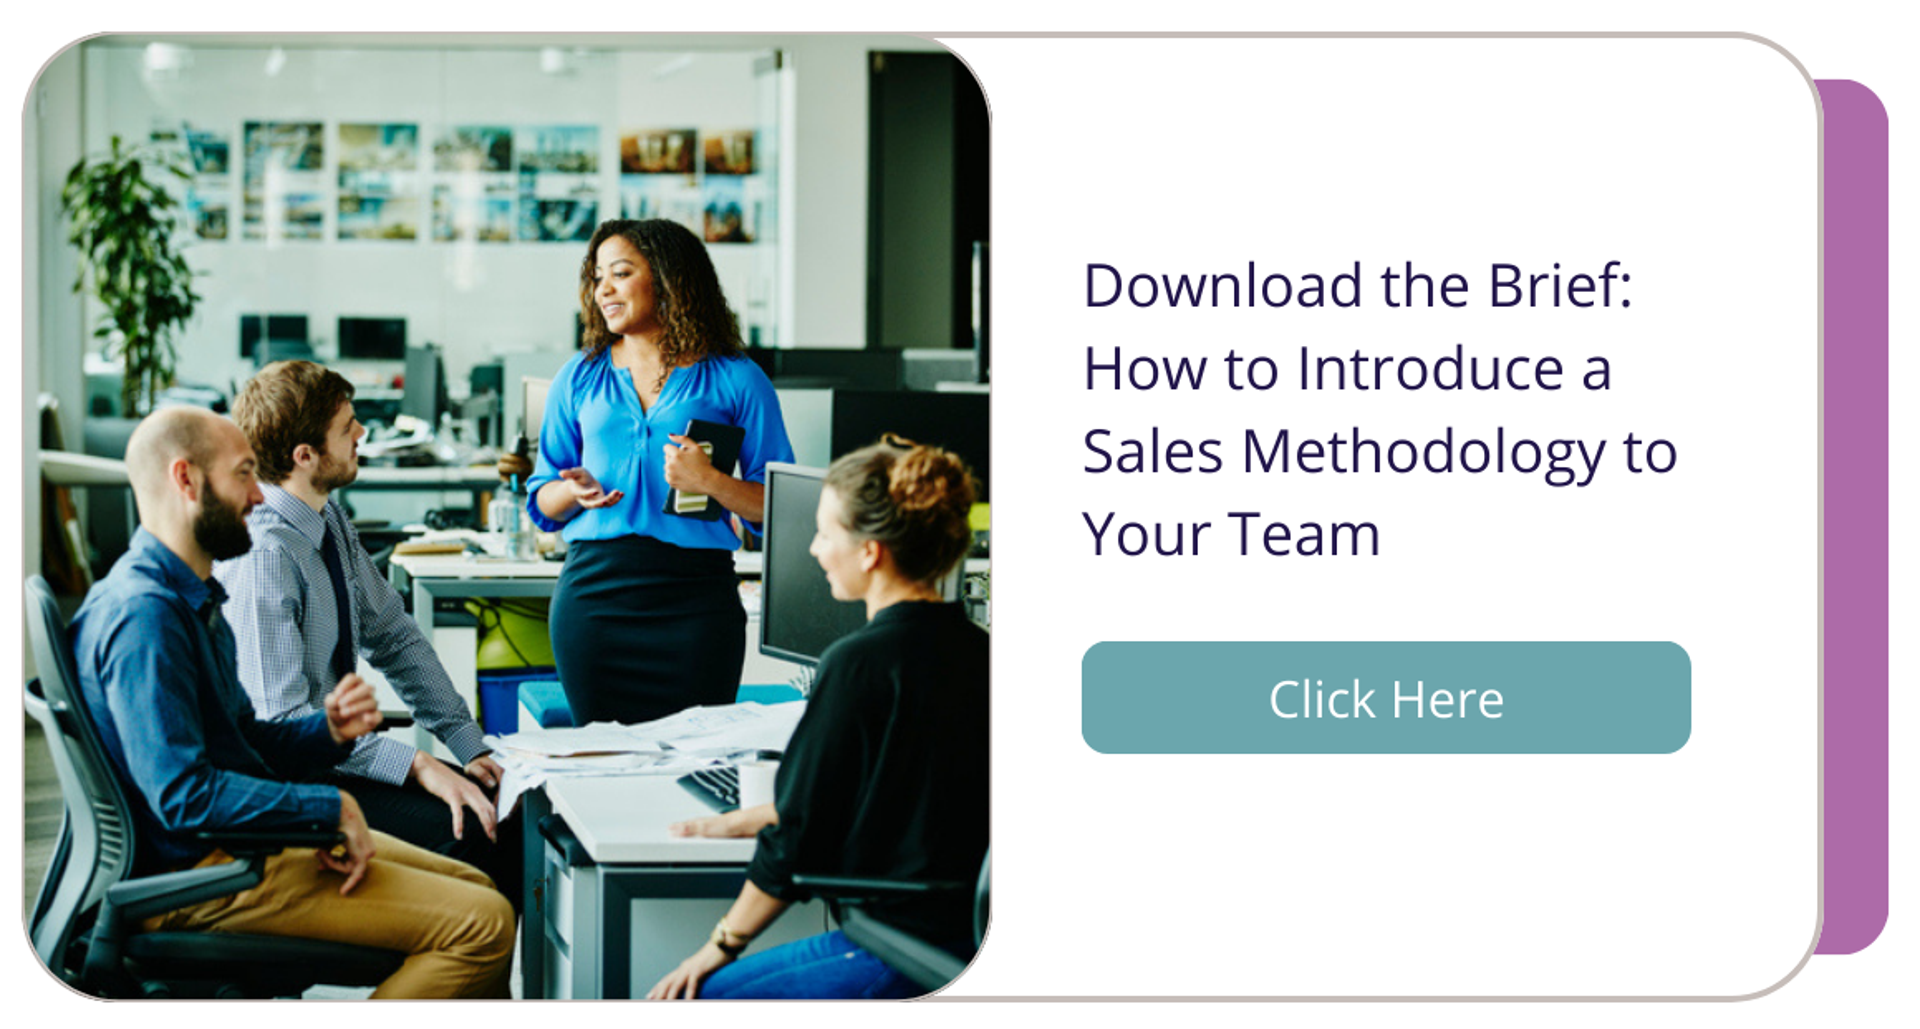 click here to download the brief: how to introduce a sales methodology to your team